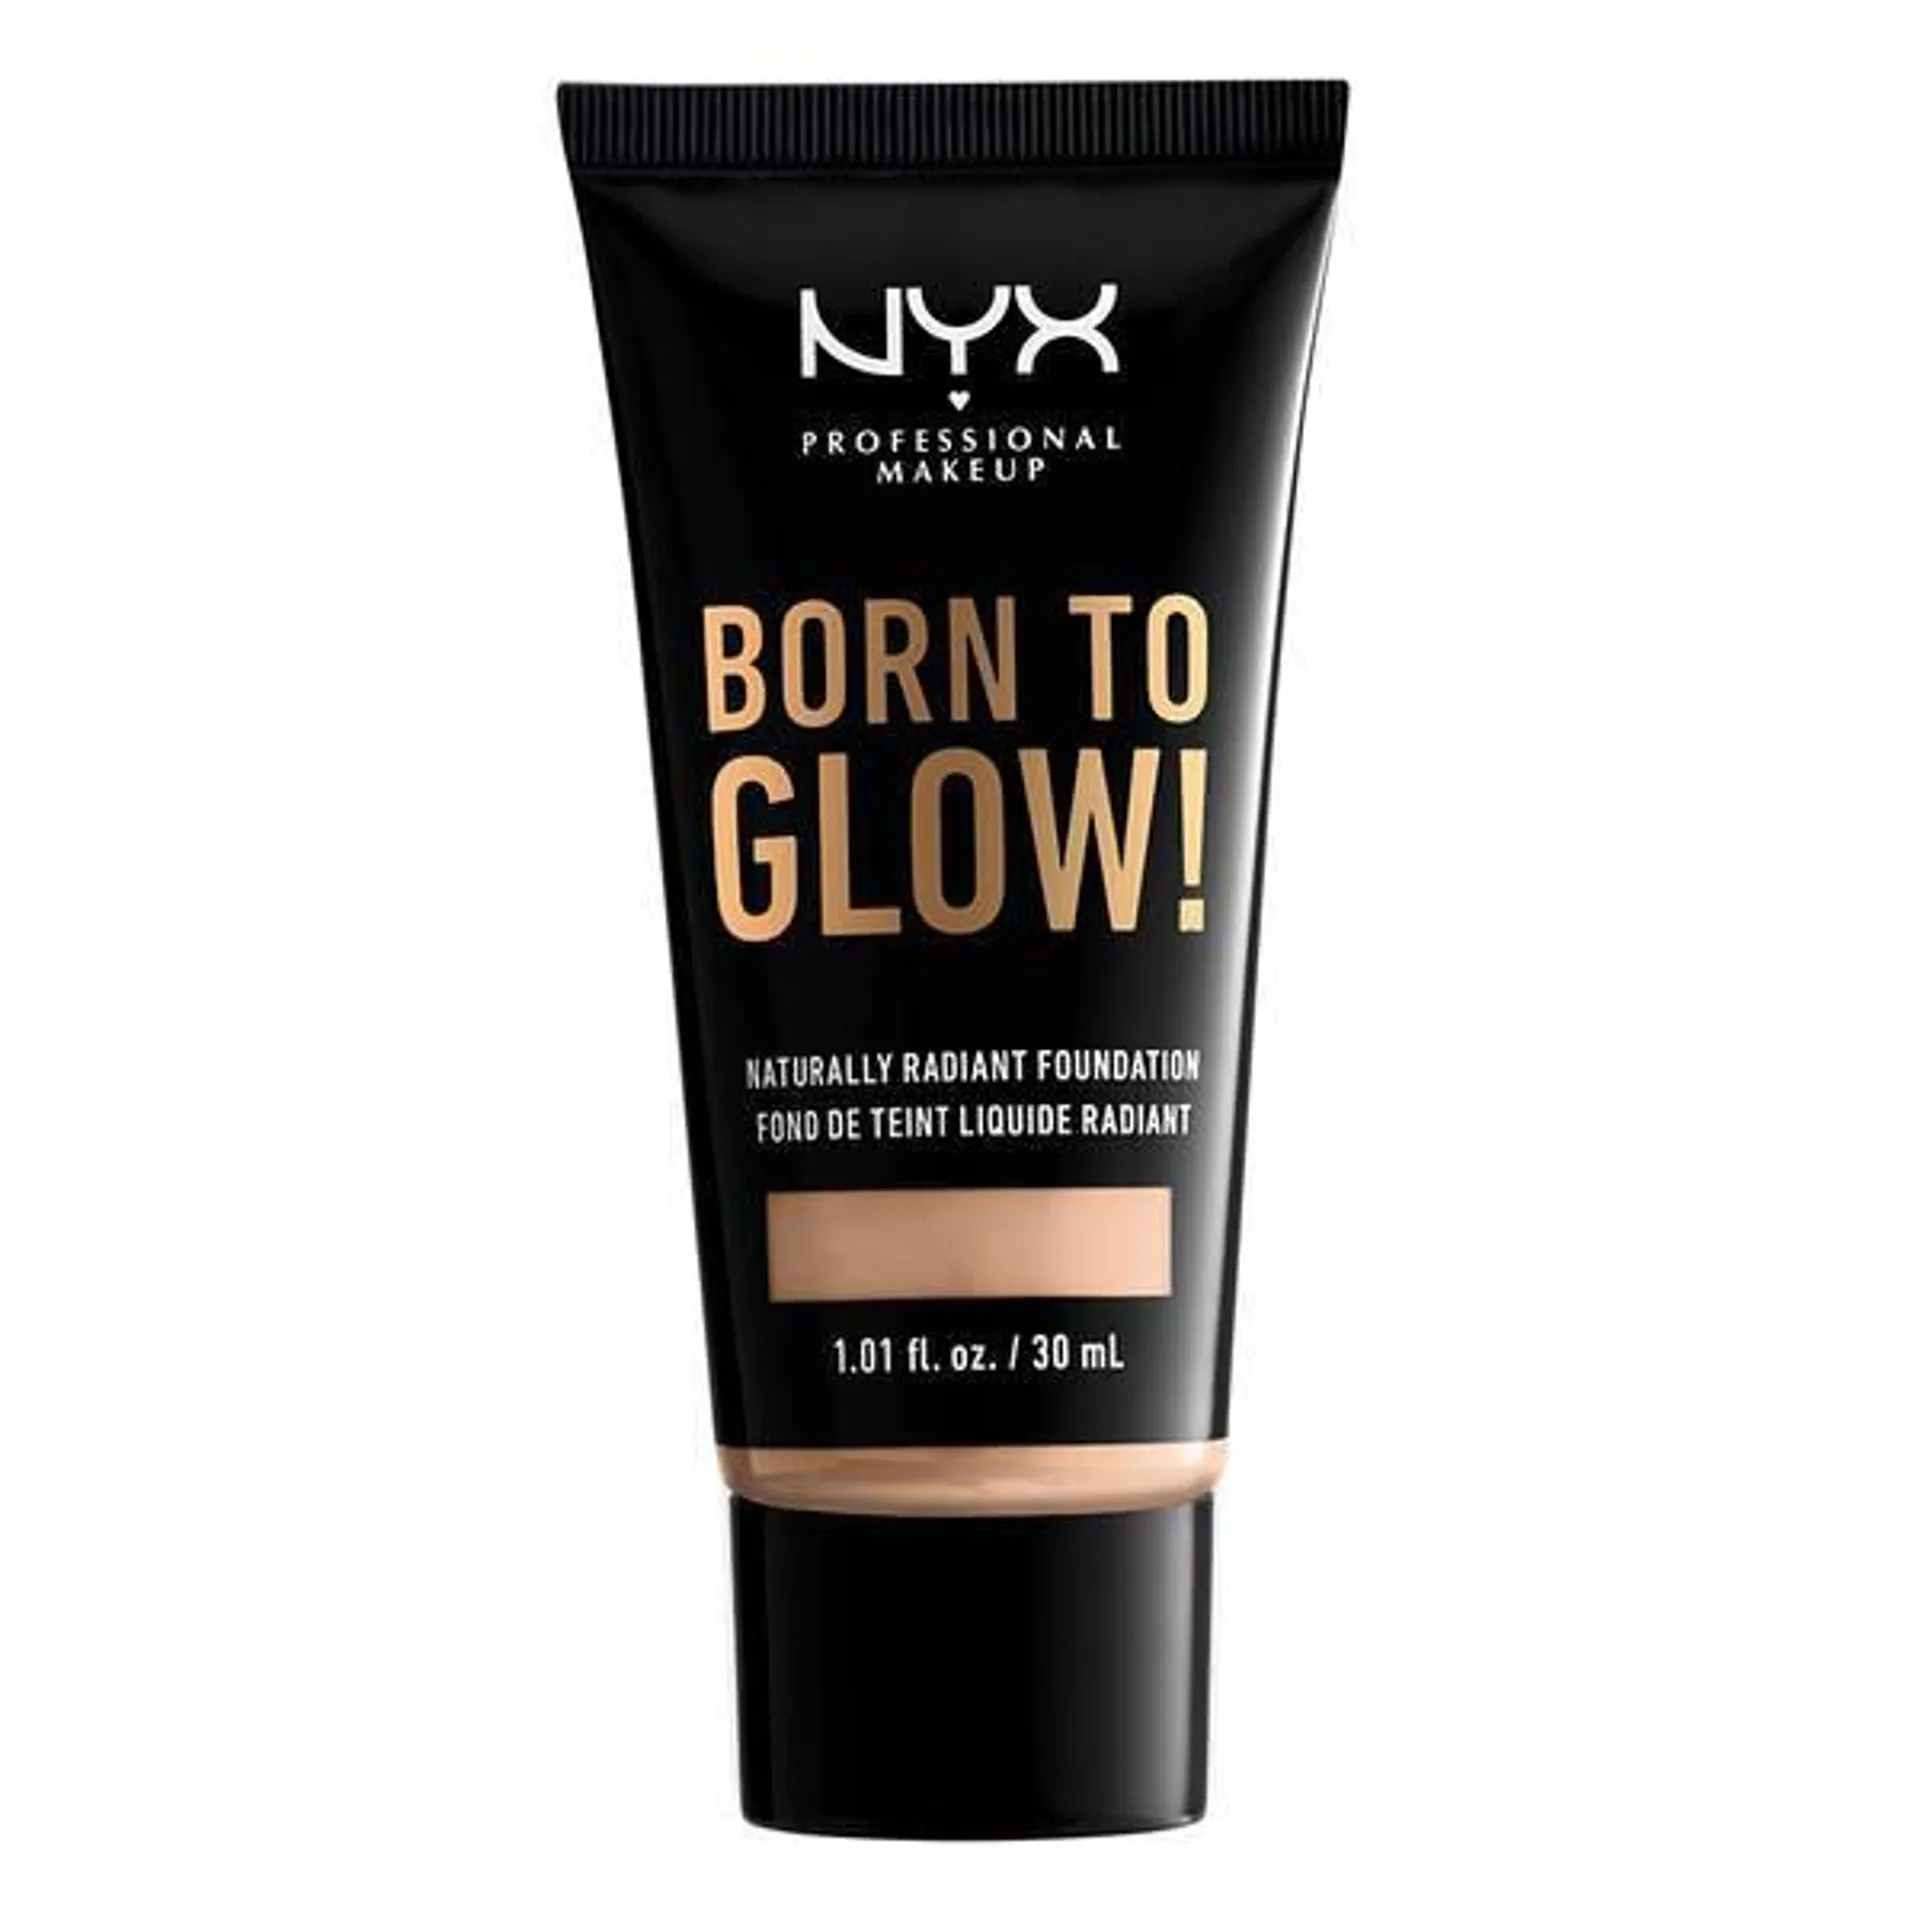 BASE DE MAQUILLAJE BORN TO GLOW NATURALLY RADIANT FOUNDATION - NYX PROFESSIONAL MAKEUP